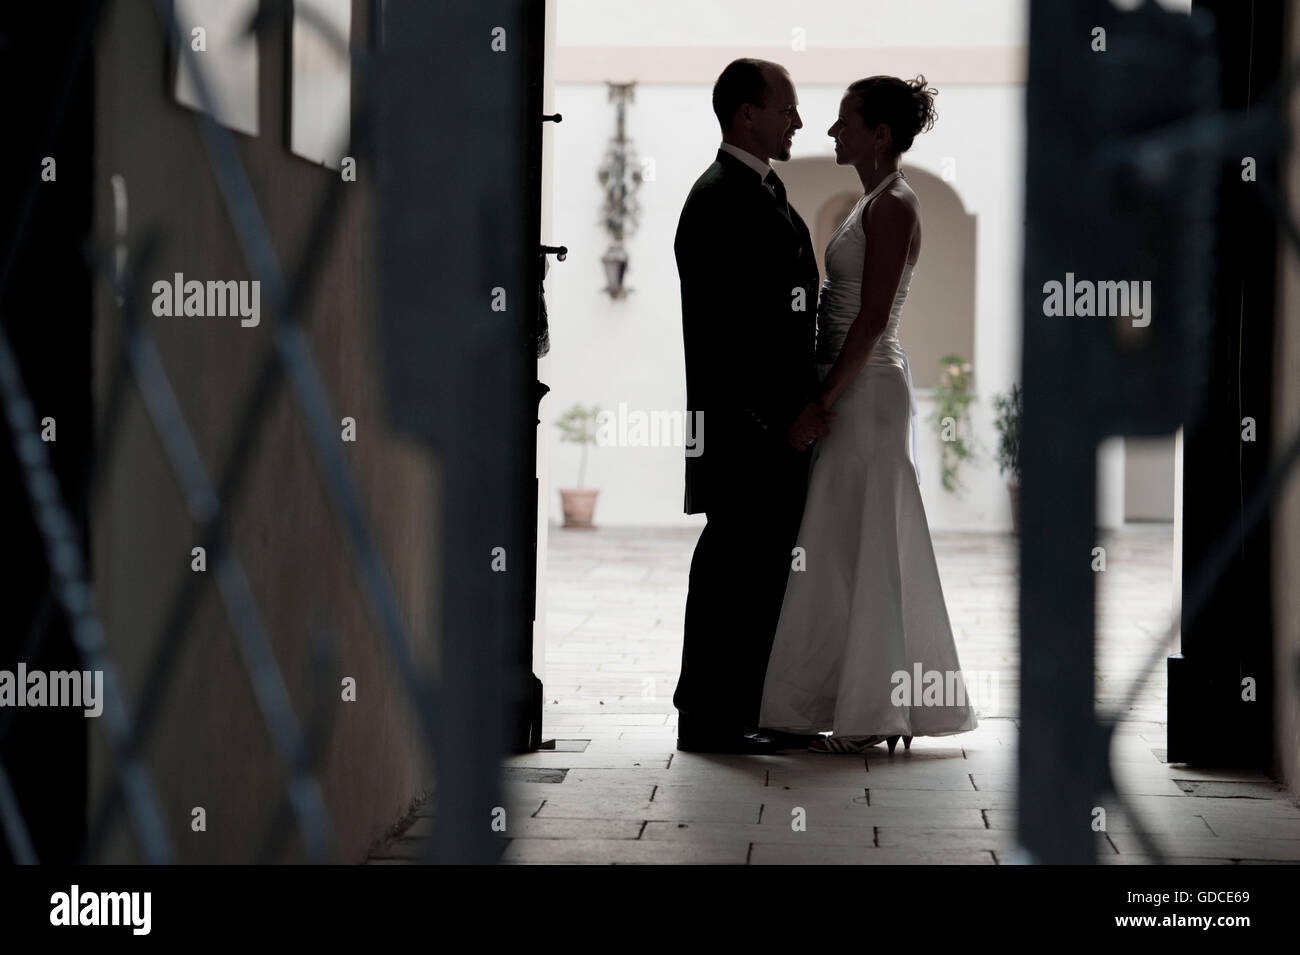 Couples nuptiales, silhouette Banque D'Images